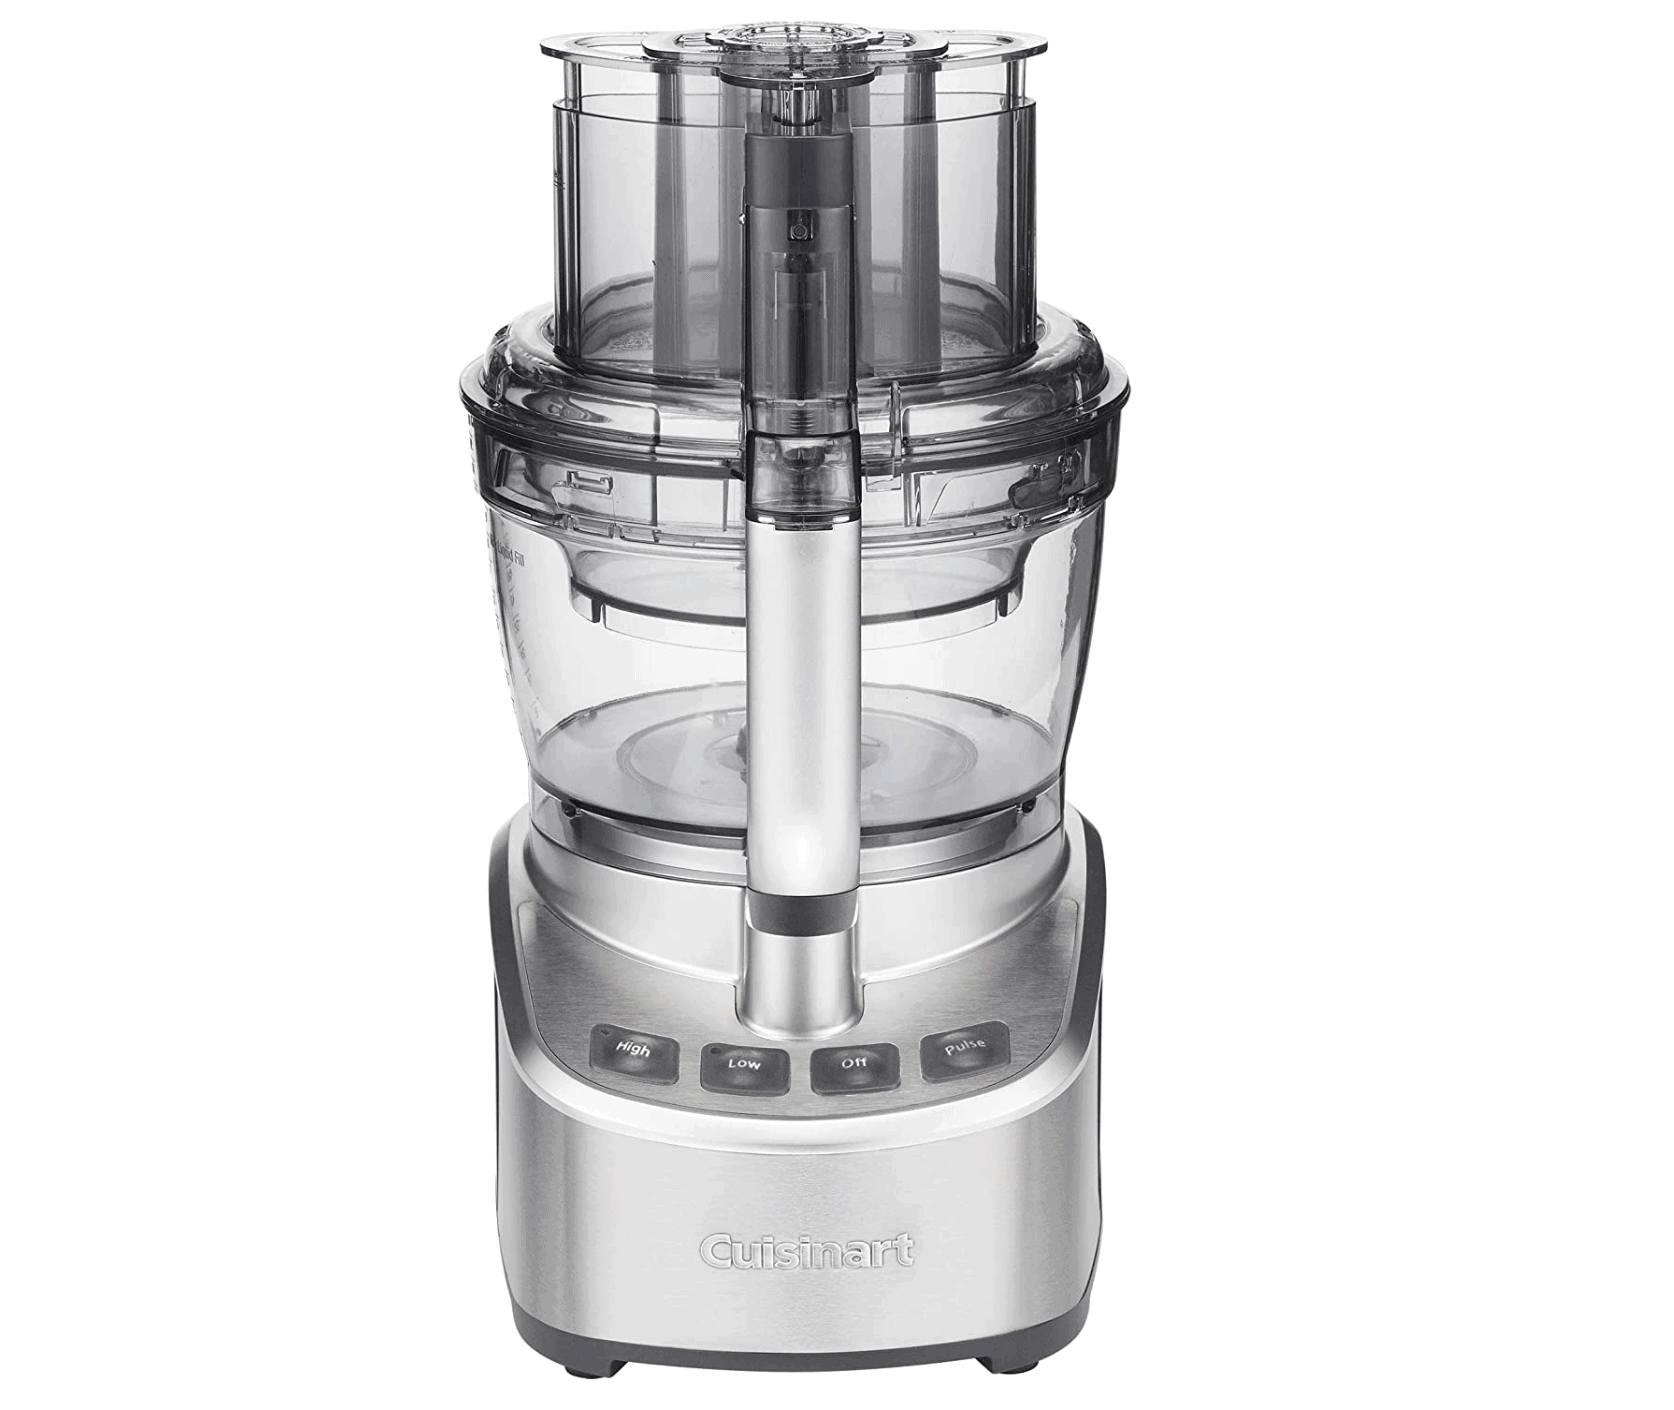 Cuisinart SFP-13 Elemental 13-Cup (Stainless Steel) Food Processor, Silver